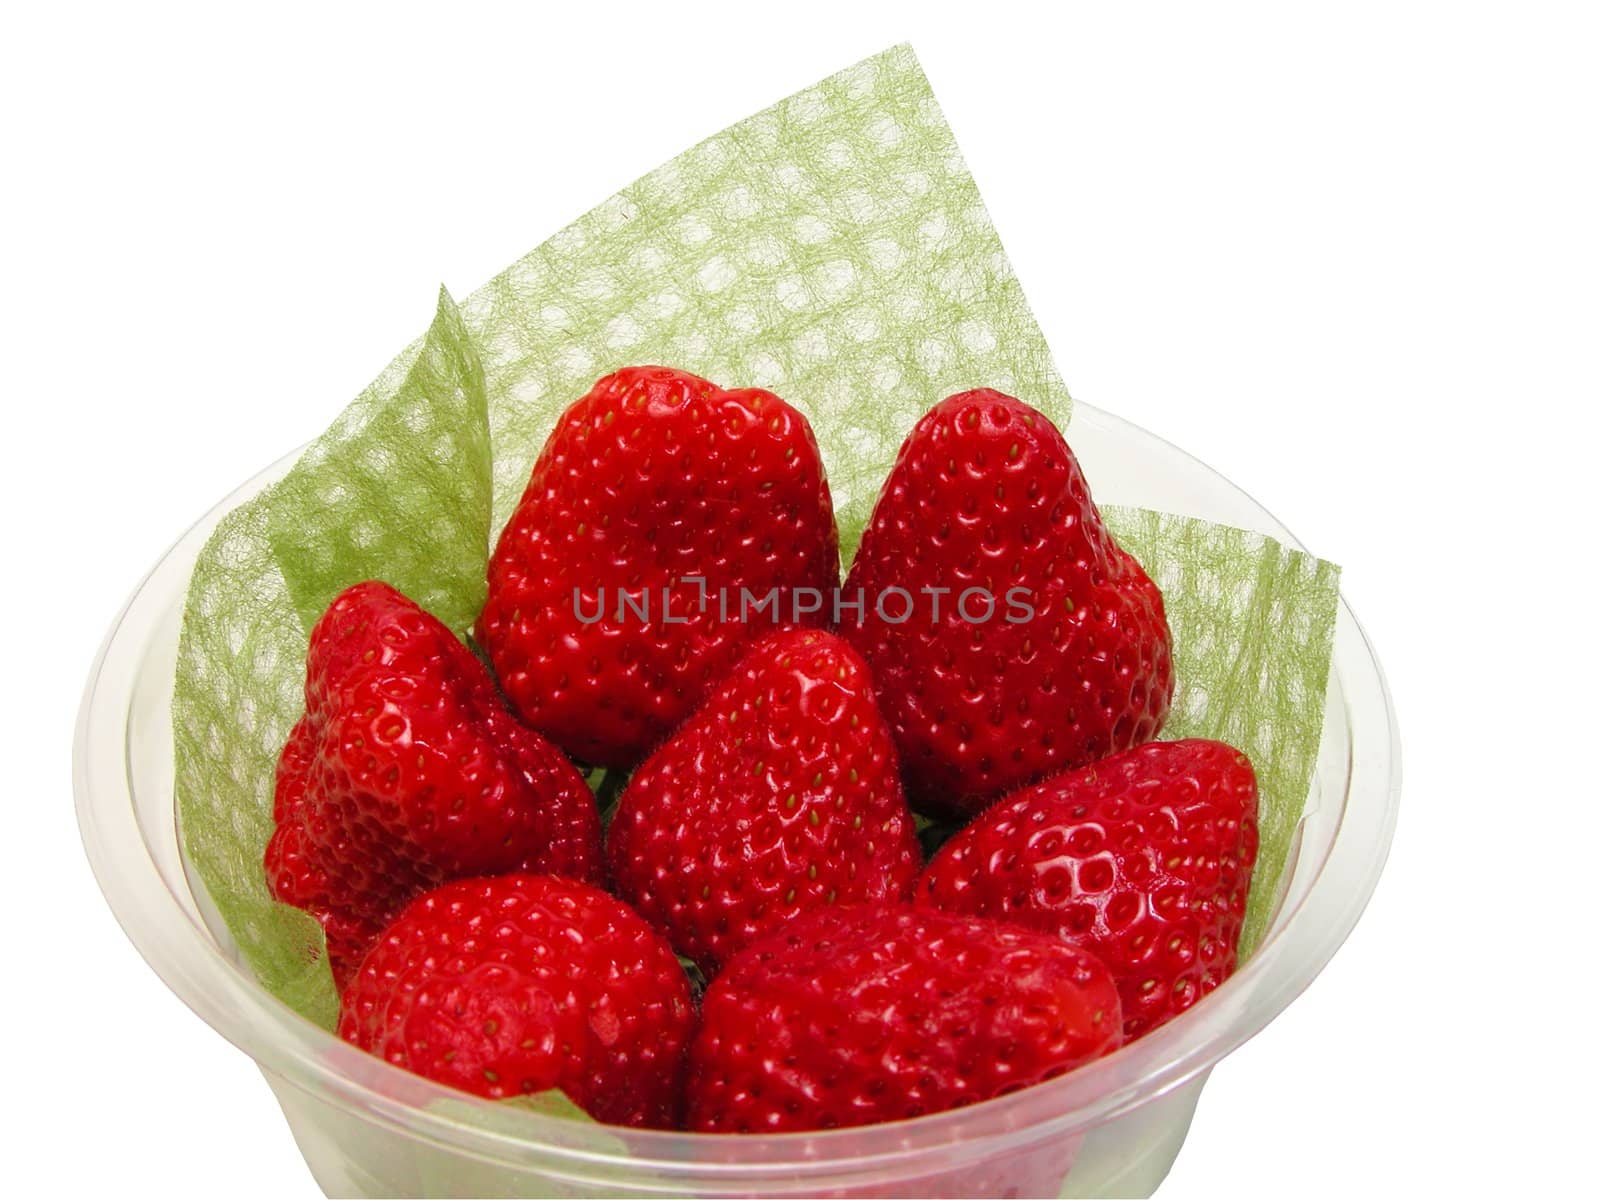  Cup with strawberries isolated over white background with clipping path         